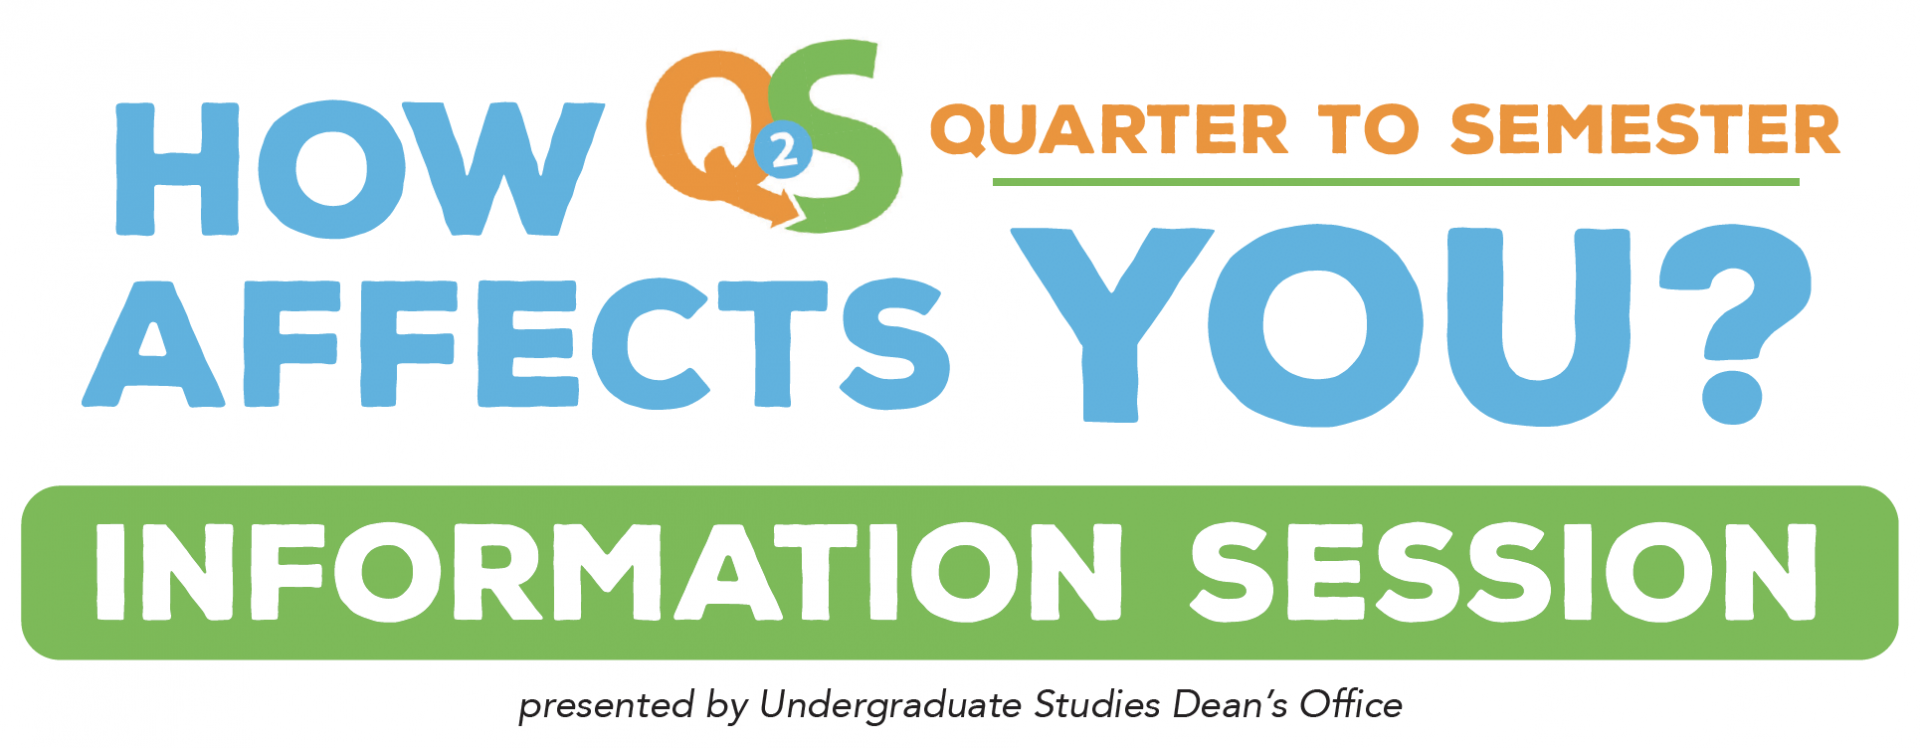 How Quarters to Semesters Affects You?